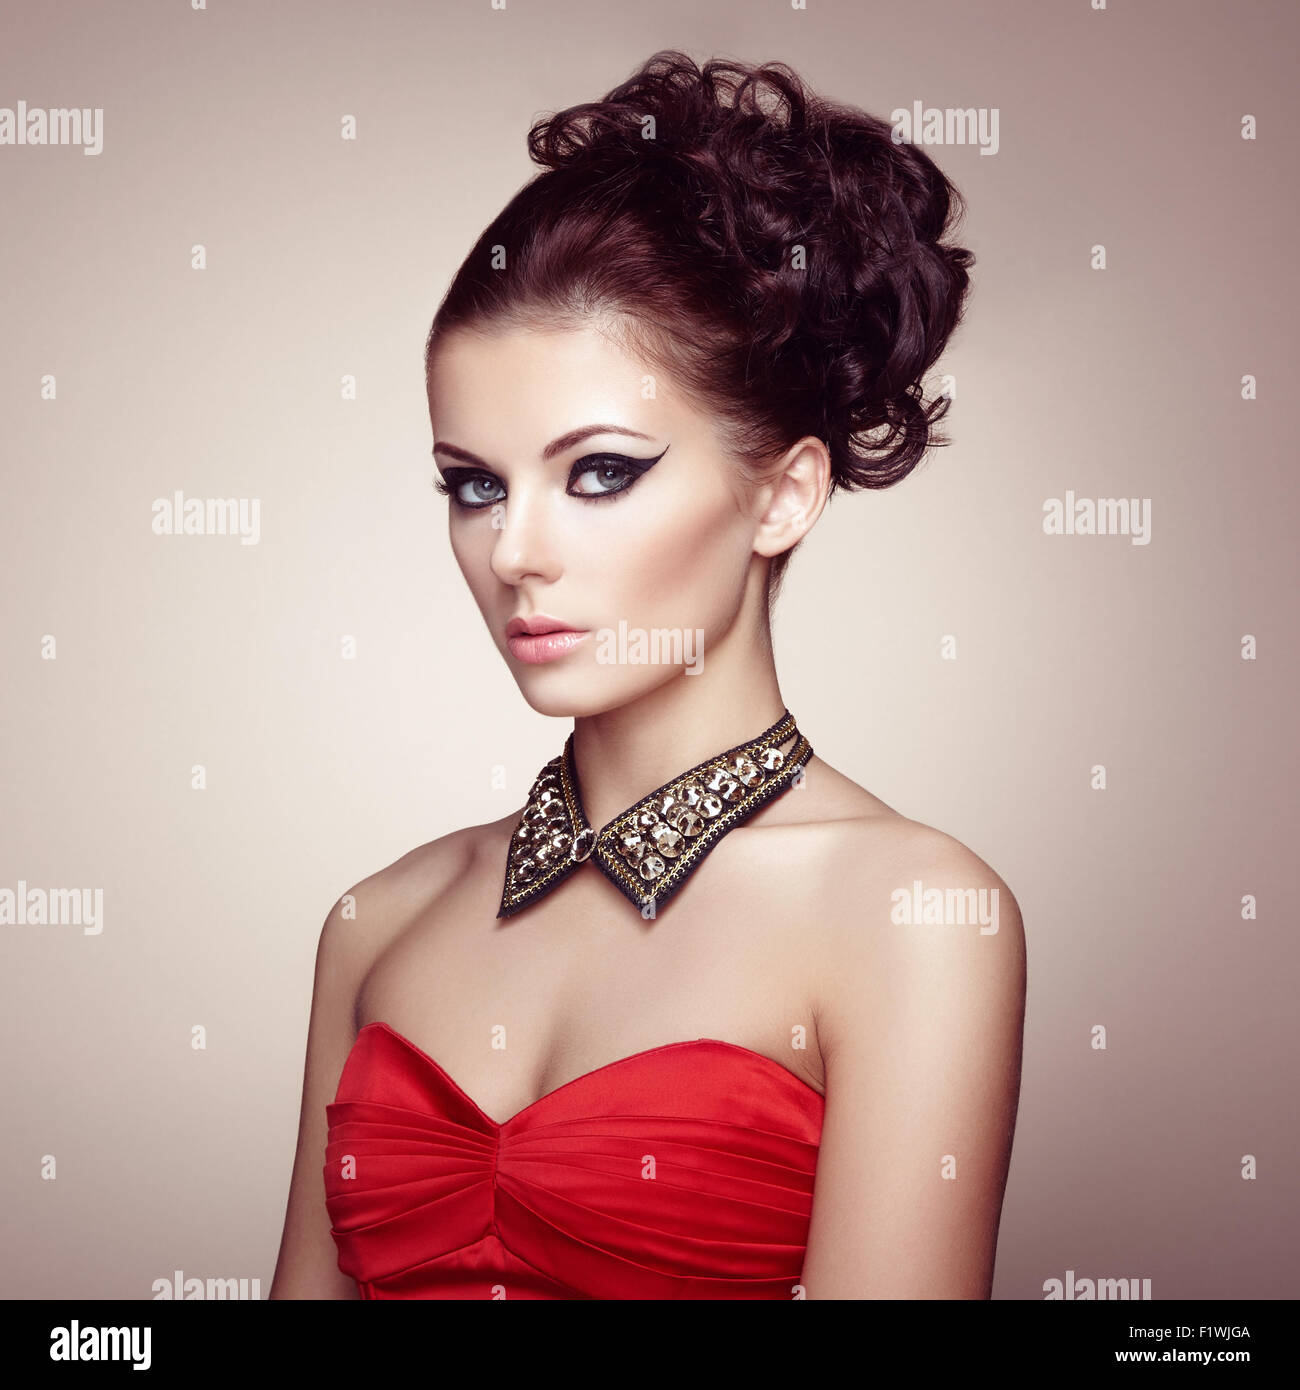 Portrait Of Beautiful Sensual Woman With Elegant Hairstyle Diamond Collar Perfect Makeup